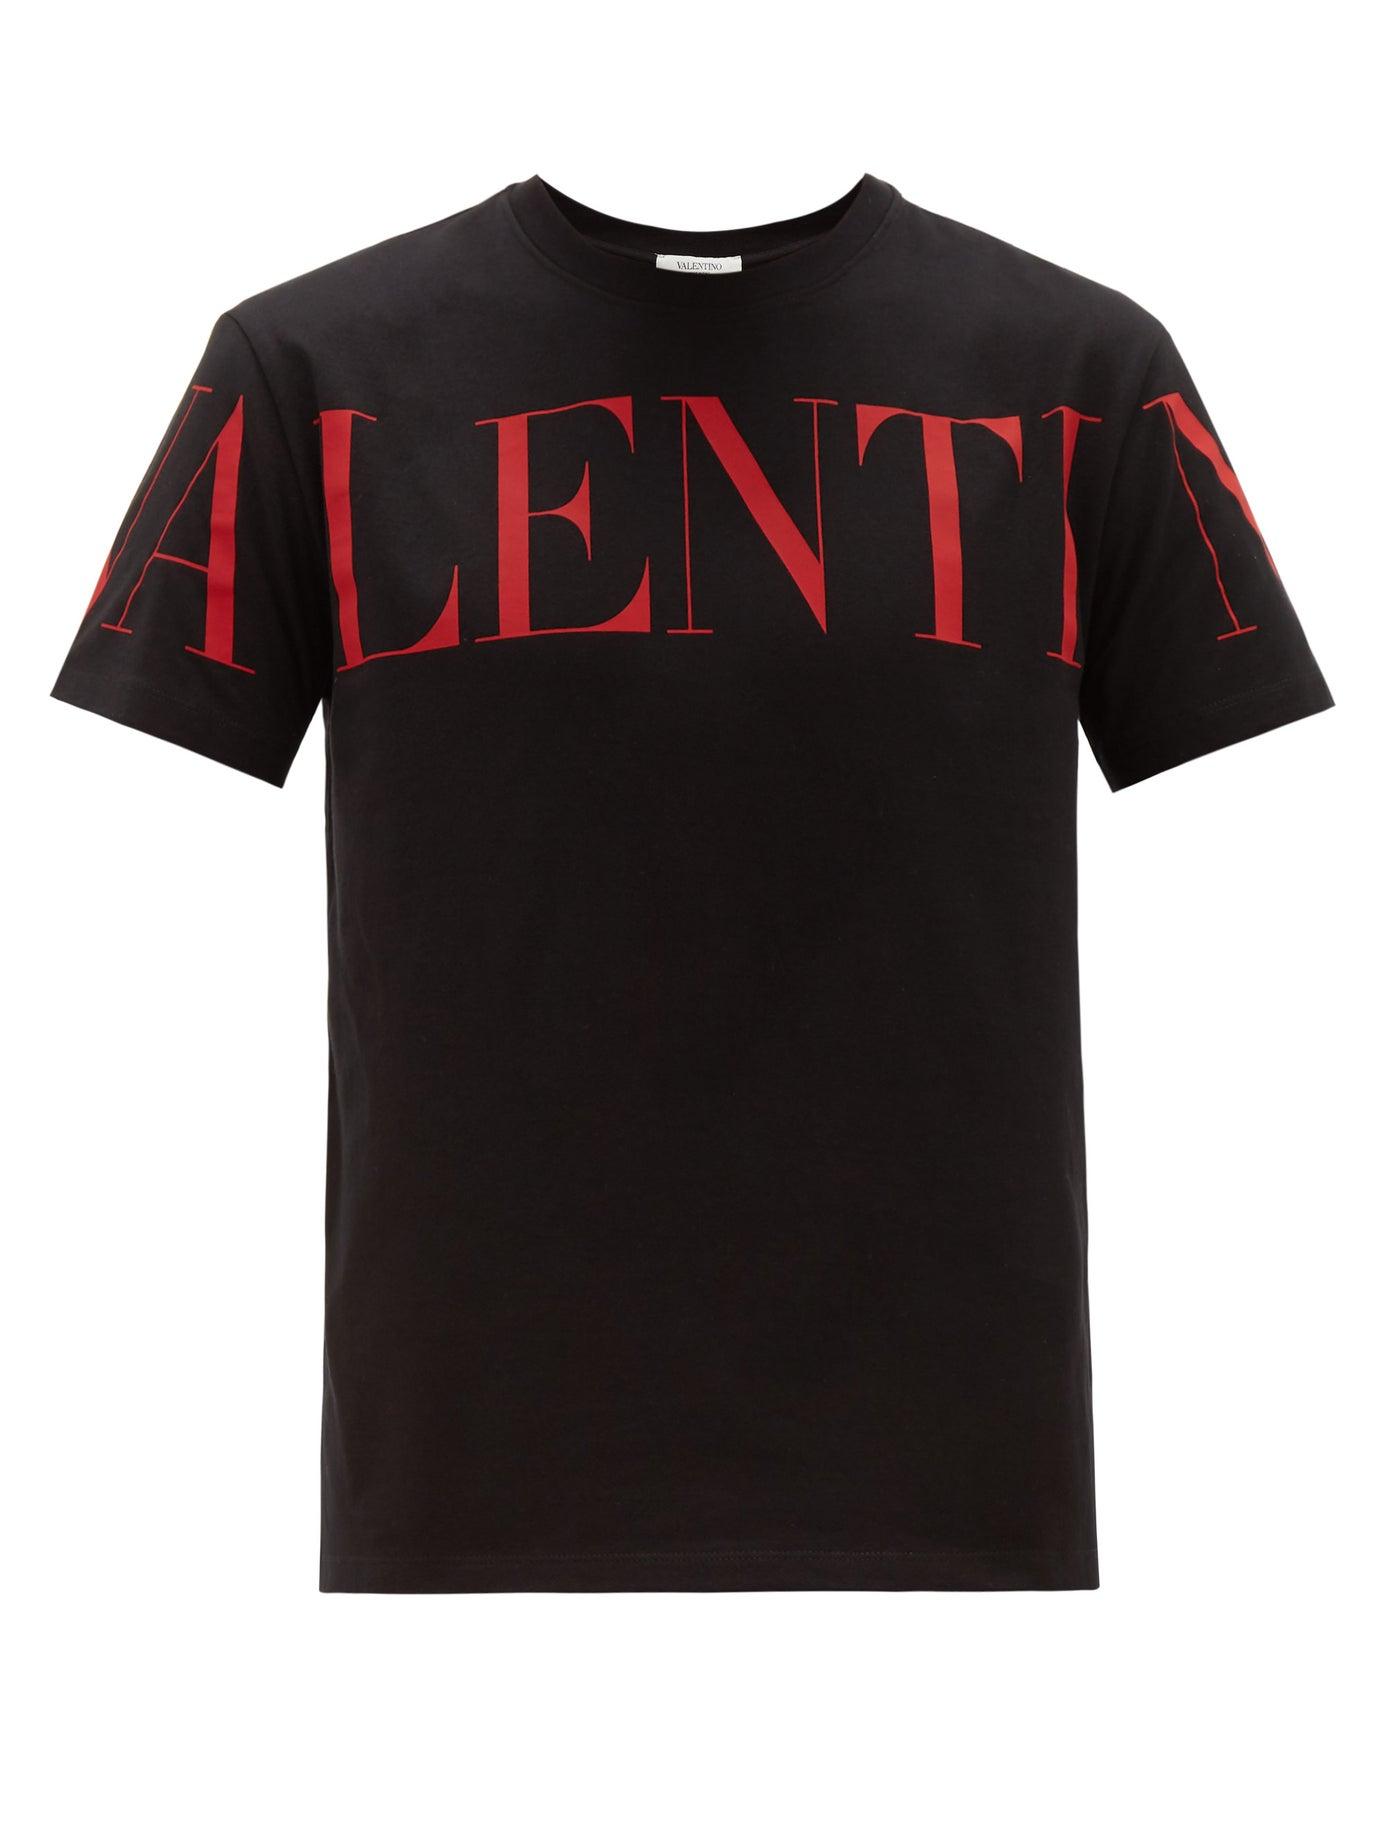 Valentino Logo-print Cotton T-shirt in Black for Men - Save 34% - Lyst